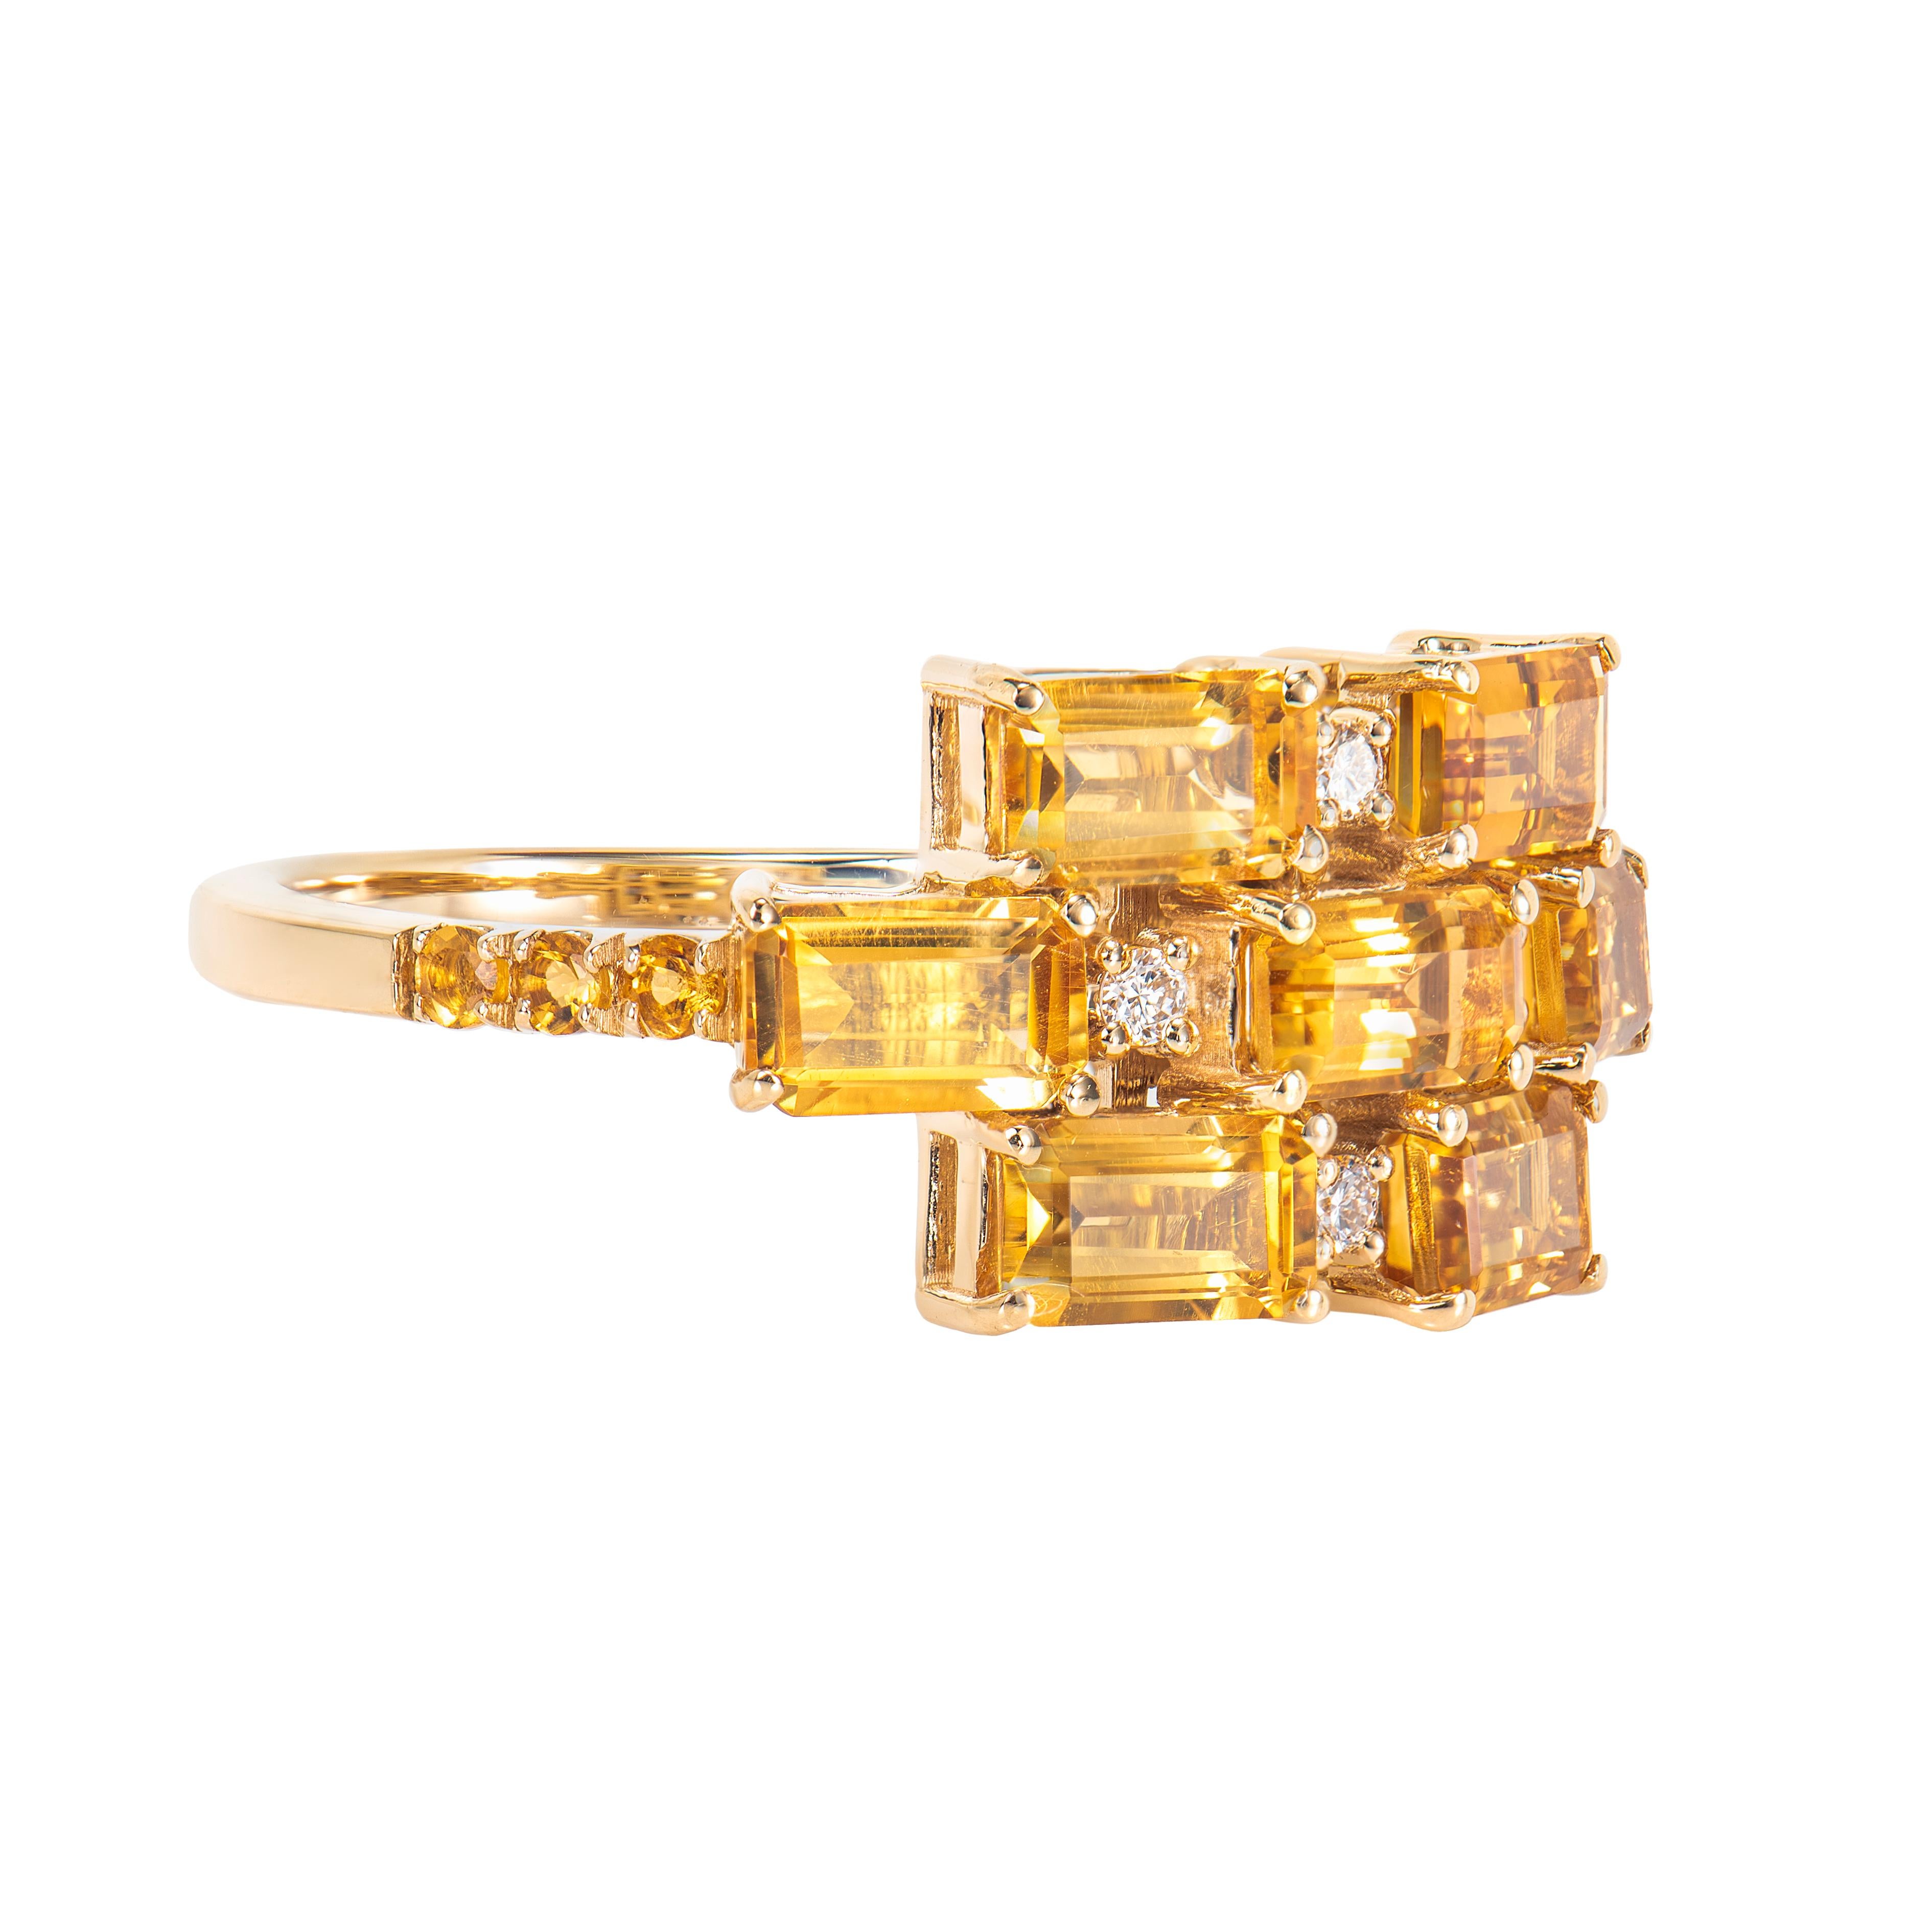 It is a fancy citrine ring in an octagon shape. This ring made of precious stone has a timeless, exquisite appeal that can be worn on a variety of occasions. Materials such as  citrine are suitable. One of these is a yellow gold citrine ring.
 